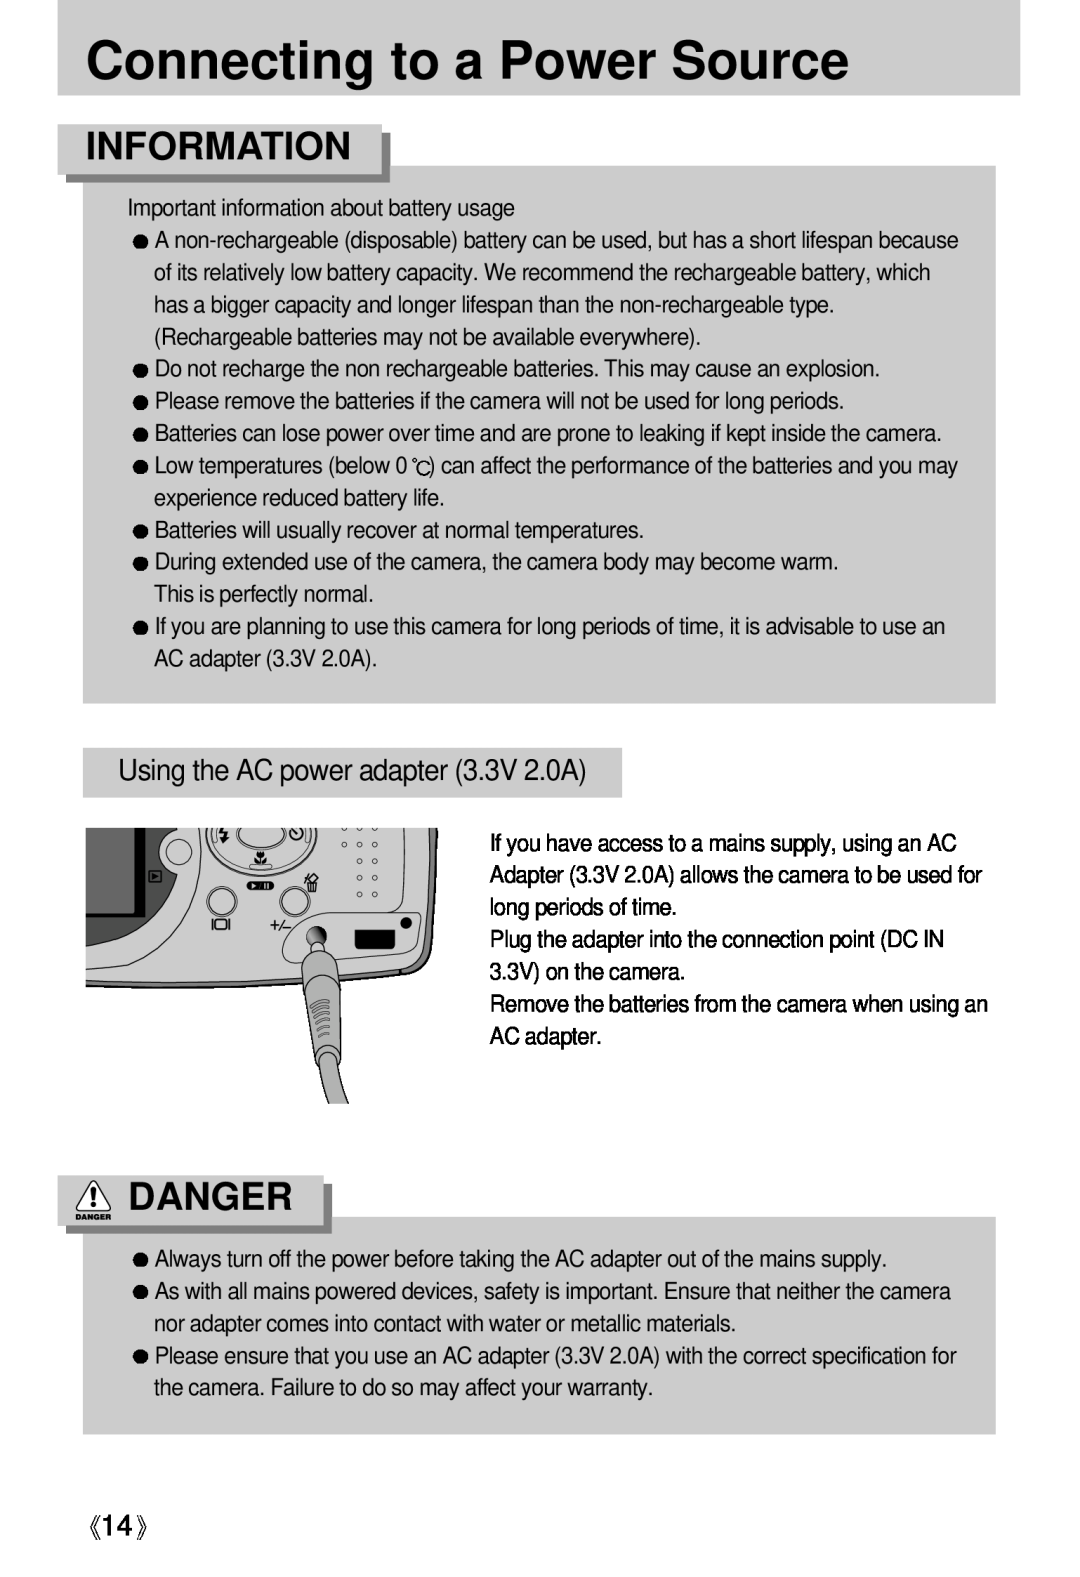 Samsung Digimax U-CA user manual Connecting to a Power Source, Information, Danger, Using the AC power adapter 3.3V 2.0A 